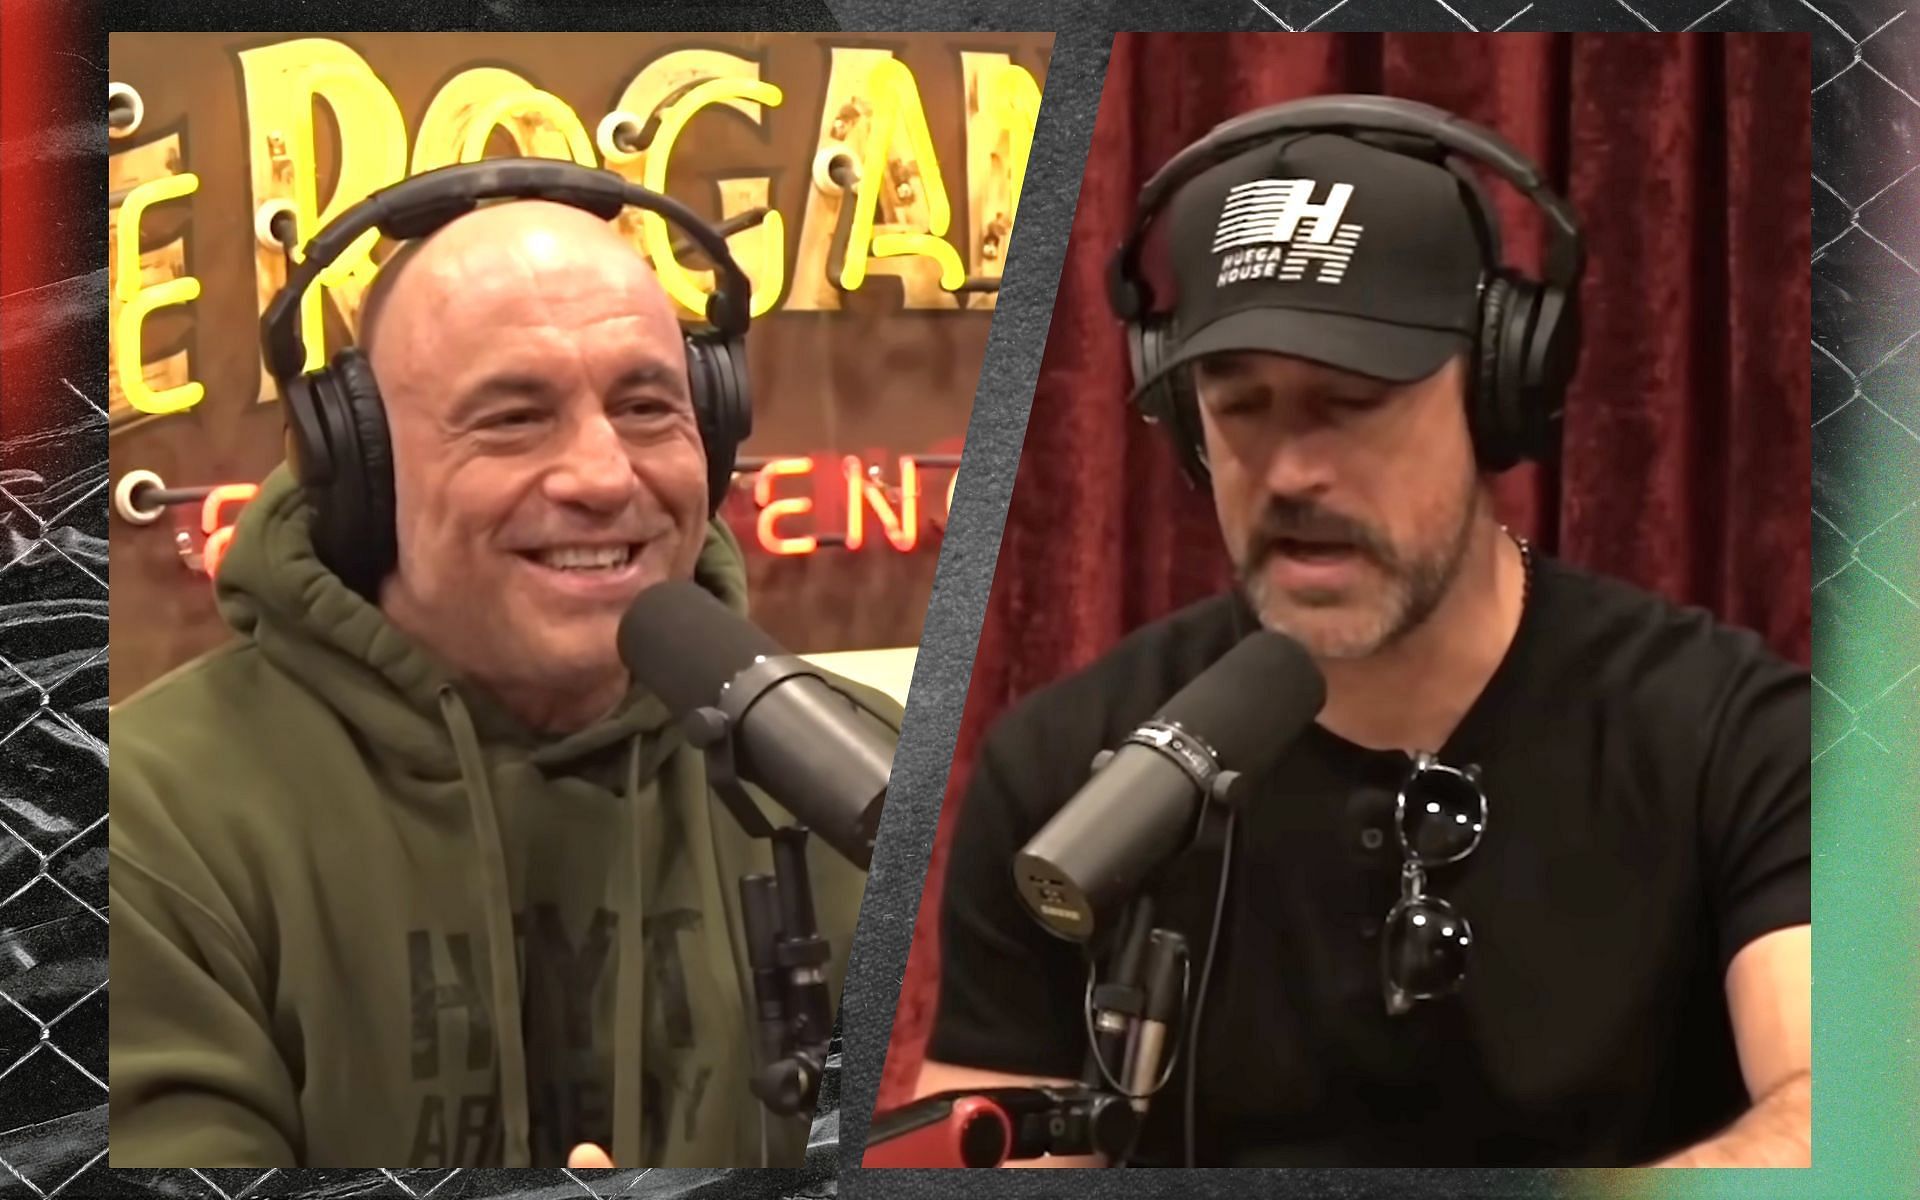 Joe Rogan (left) and Aaron Rodgers (right) on a recent episode of the JRE podcast. [Image credits: PowerfulJRE on YouTube]